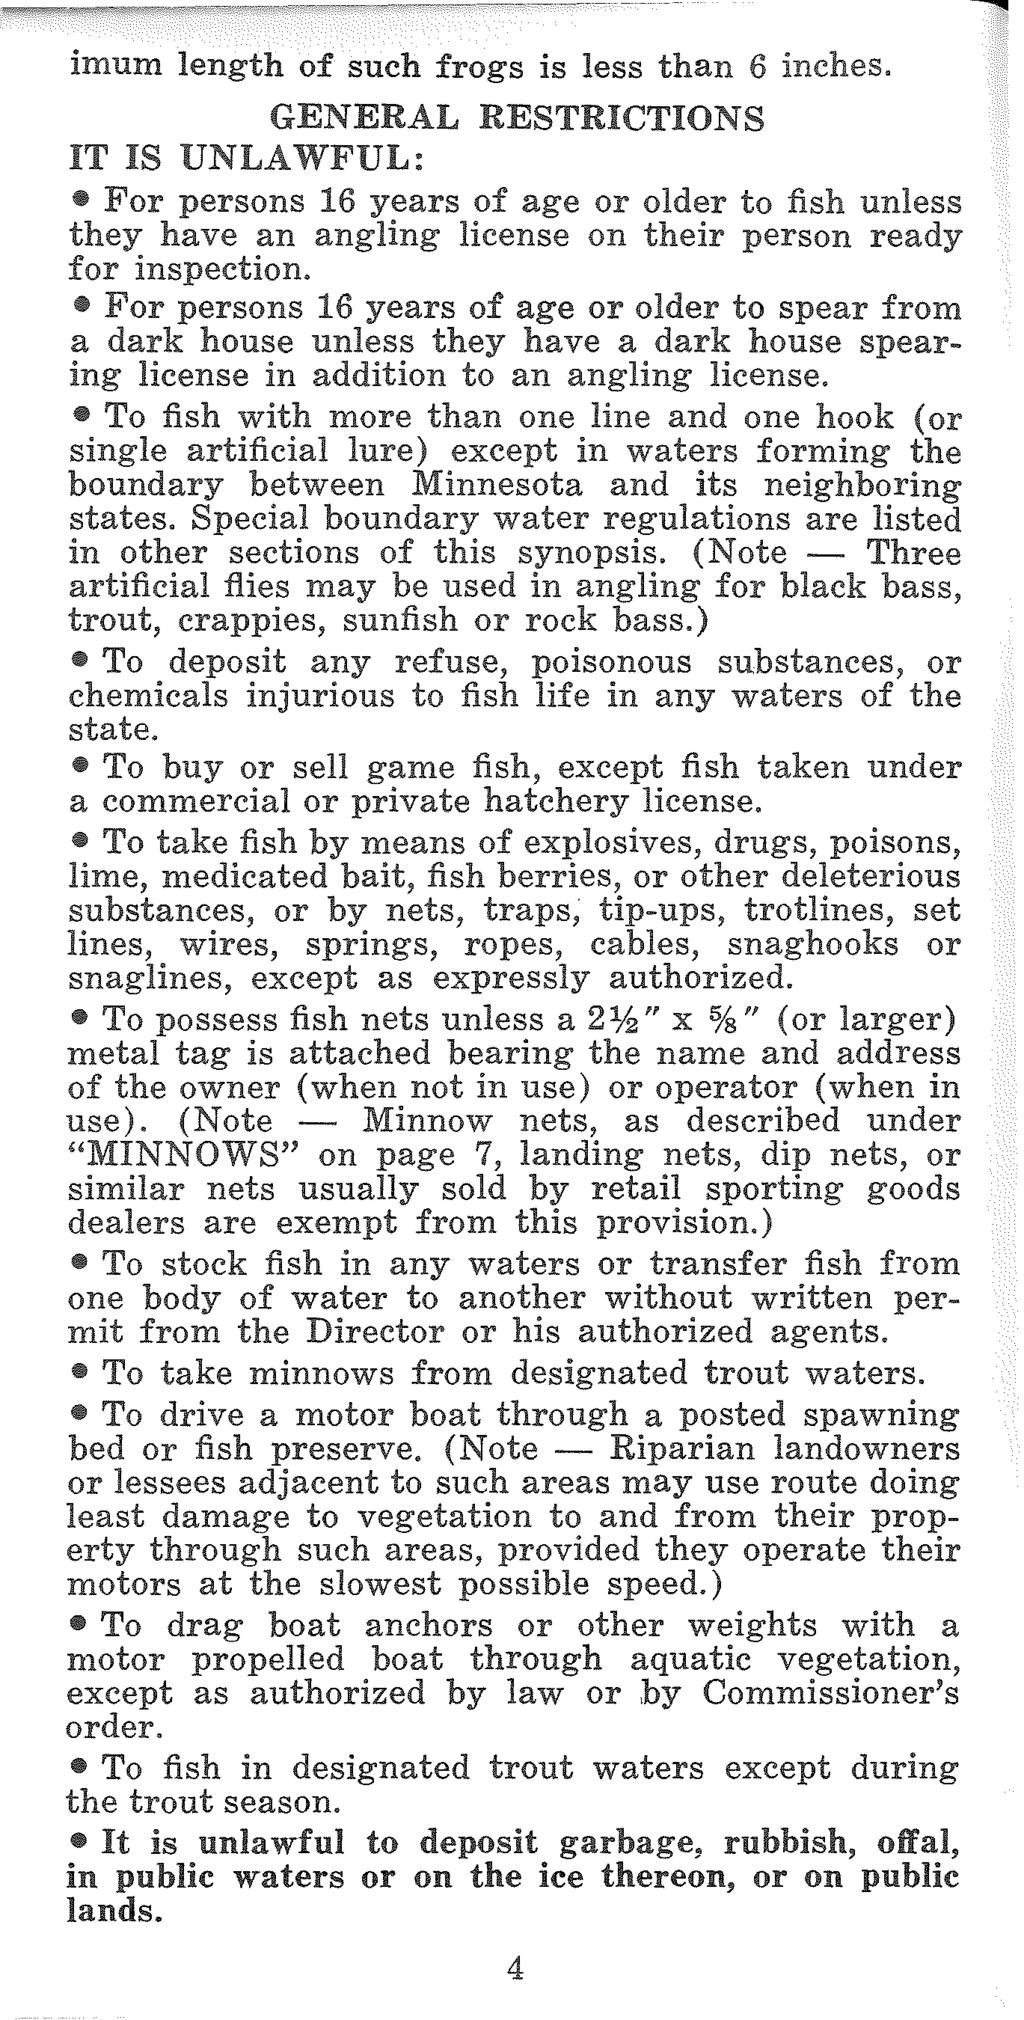 To drag motor except as order. To fish in designated the trout season.